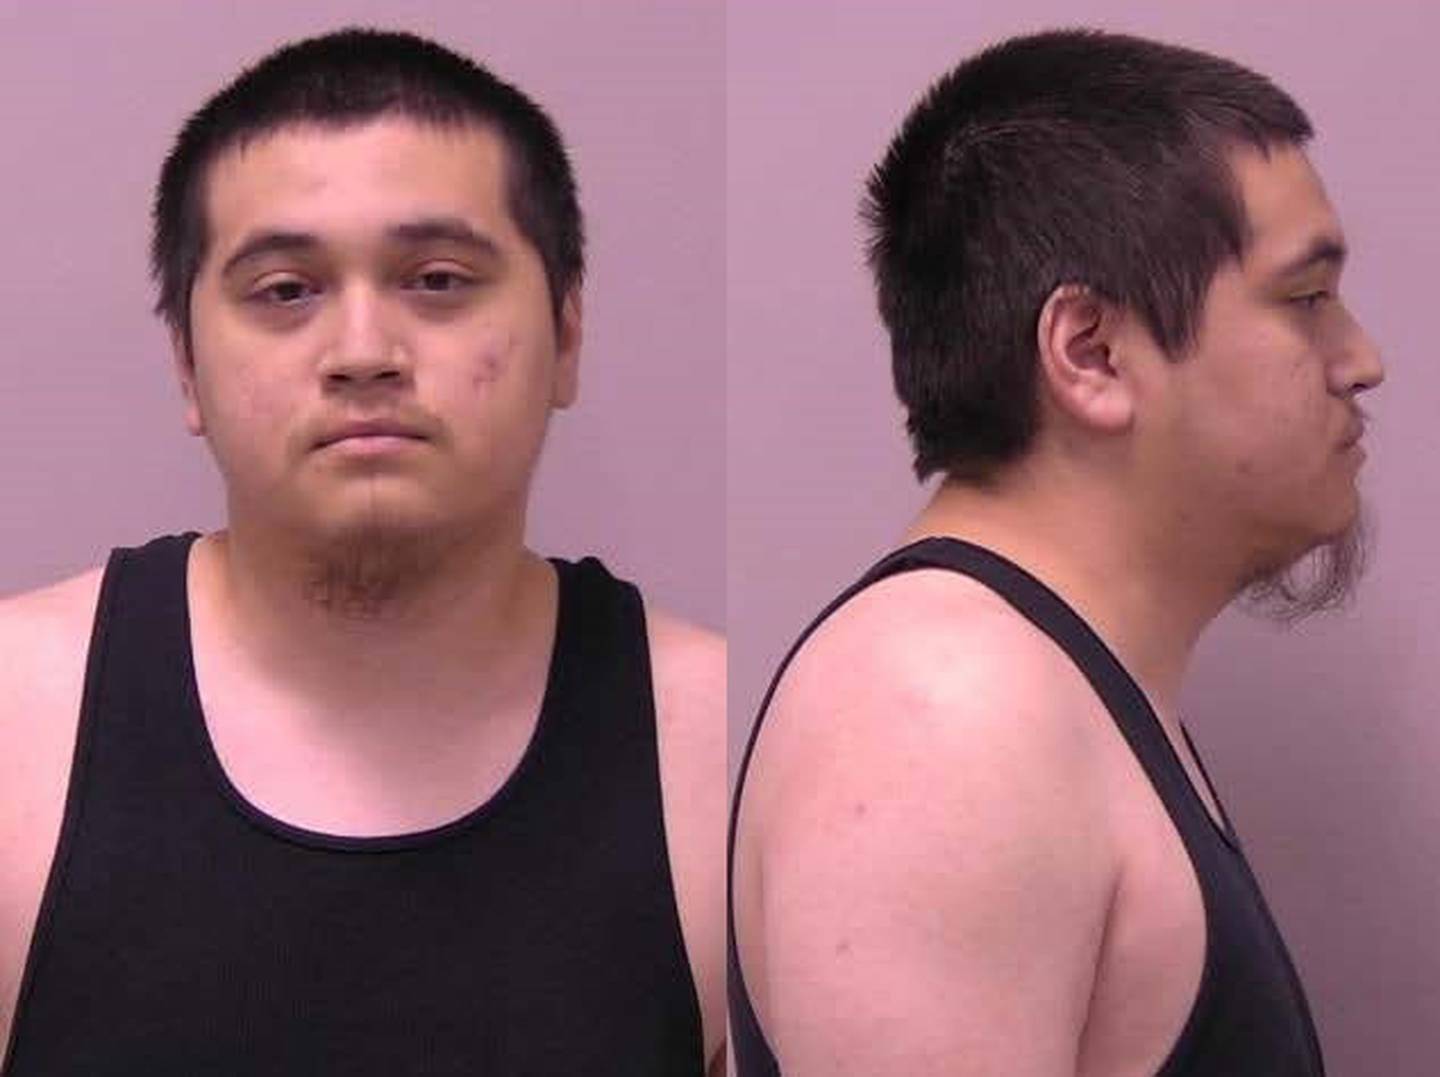 Daniel Hurtado, 26, of Elgin was charged with Involuntary Servitude (Class X Felony),Trafficking in Persons (Class 1 Felony), Involuntary Servitude (Class 1 Felony), Involuntary Servitude (Class 4 Felony) and Promoting Prostitution.